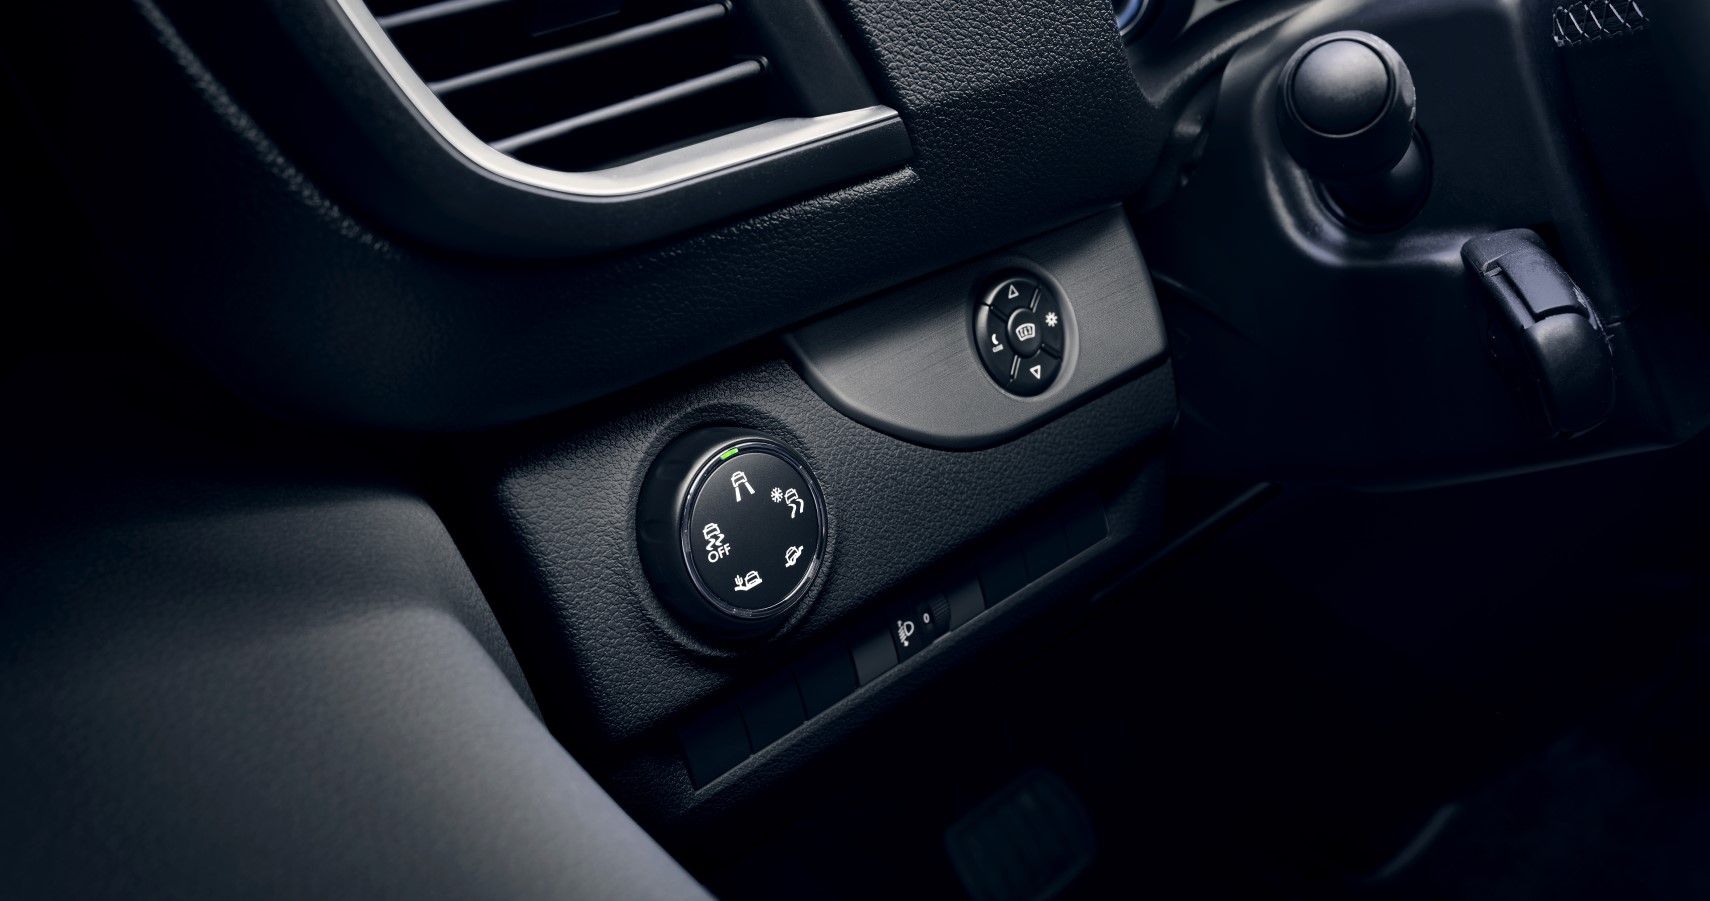 2022 Fiat E-Ulysse driving aid features dial